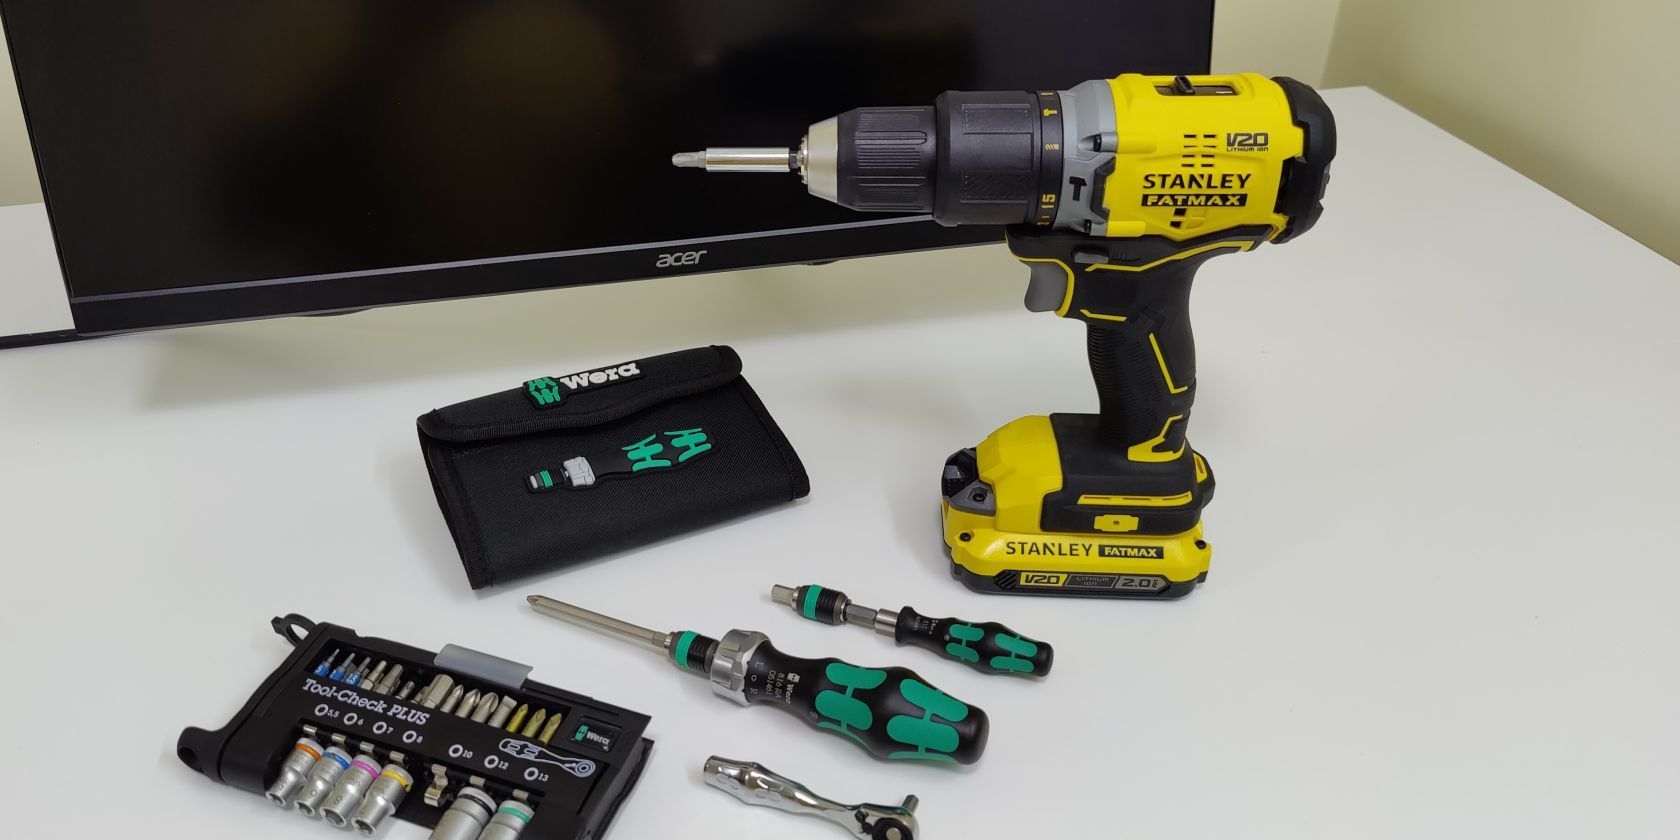 Stanley Fatmax cordless drill displayed alongside Wera hand tools